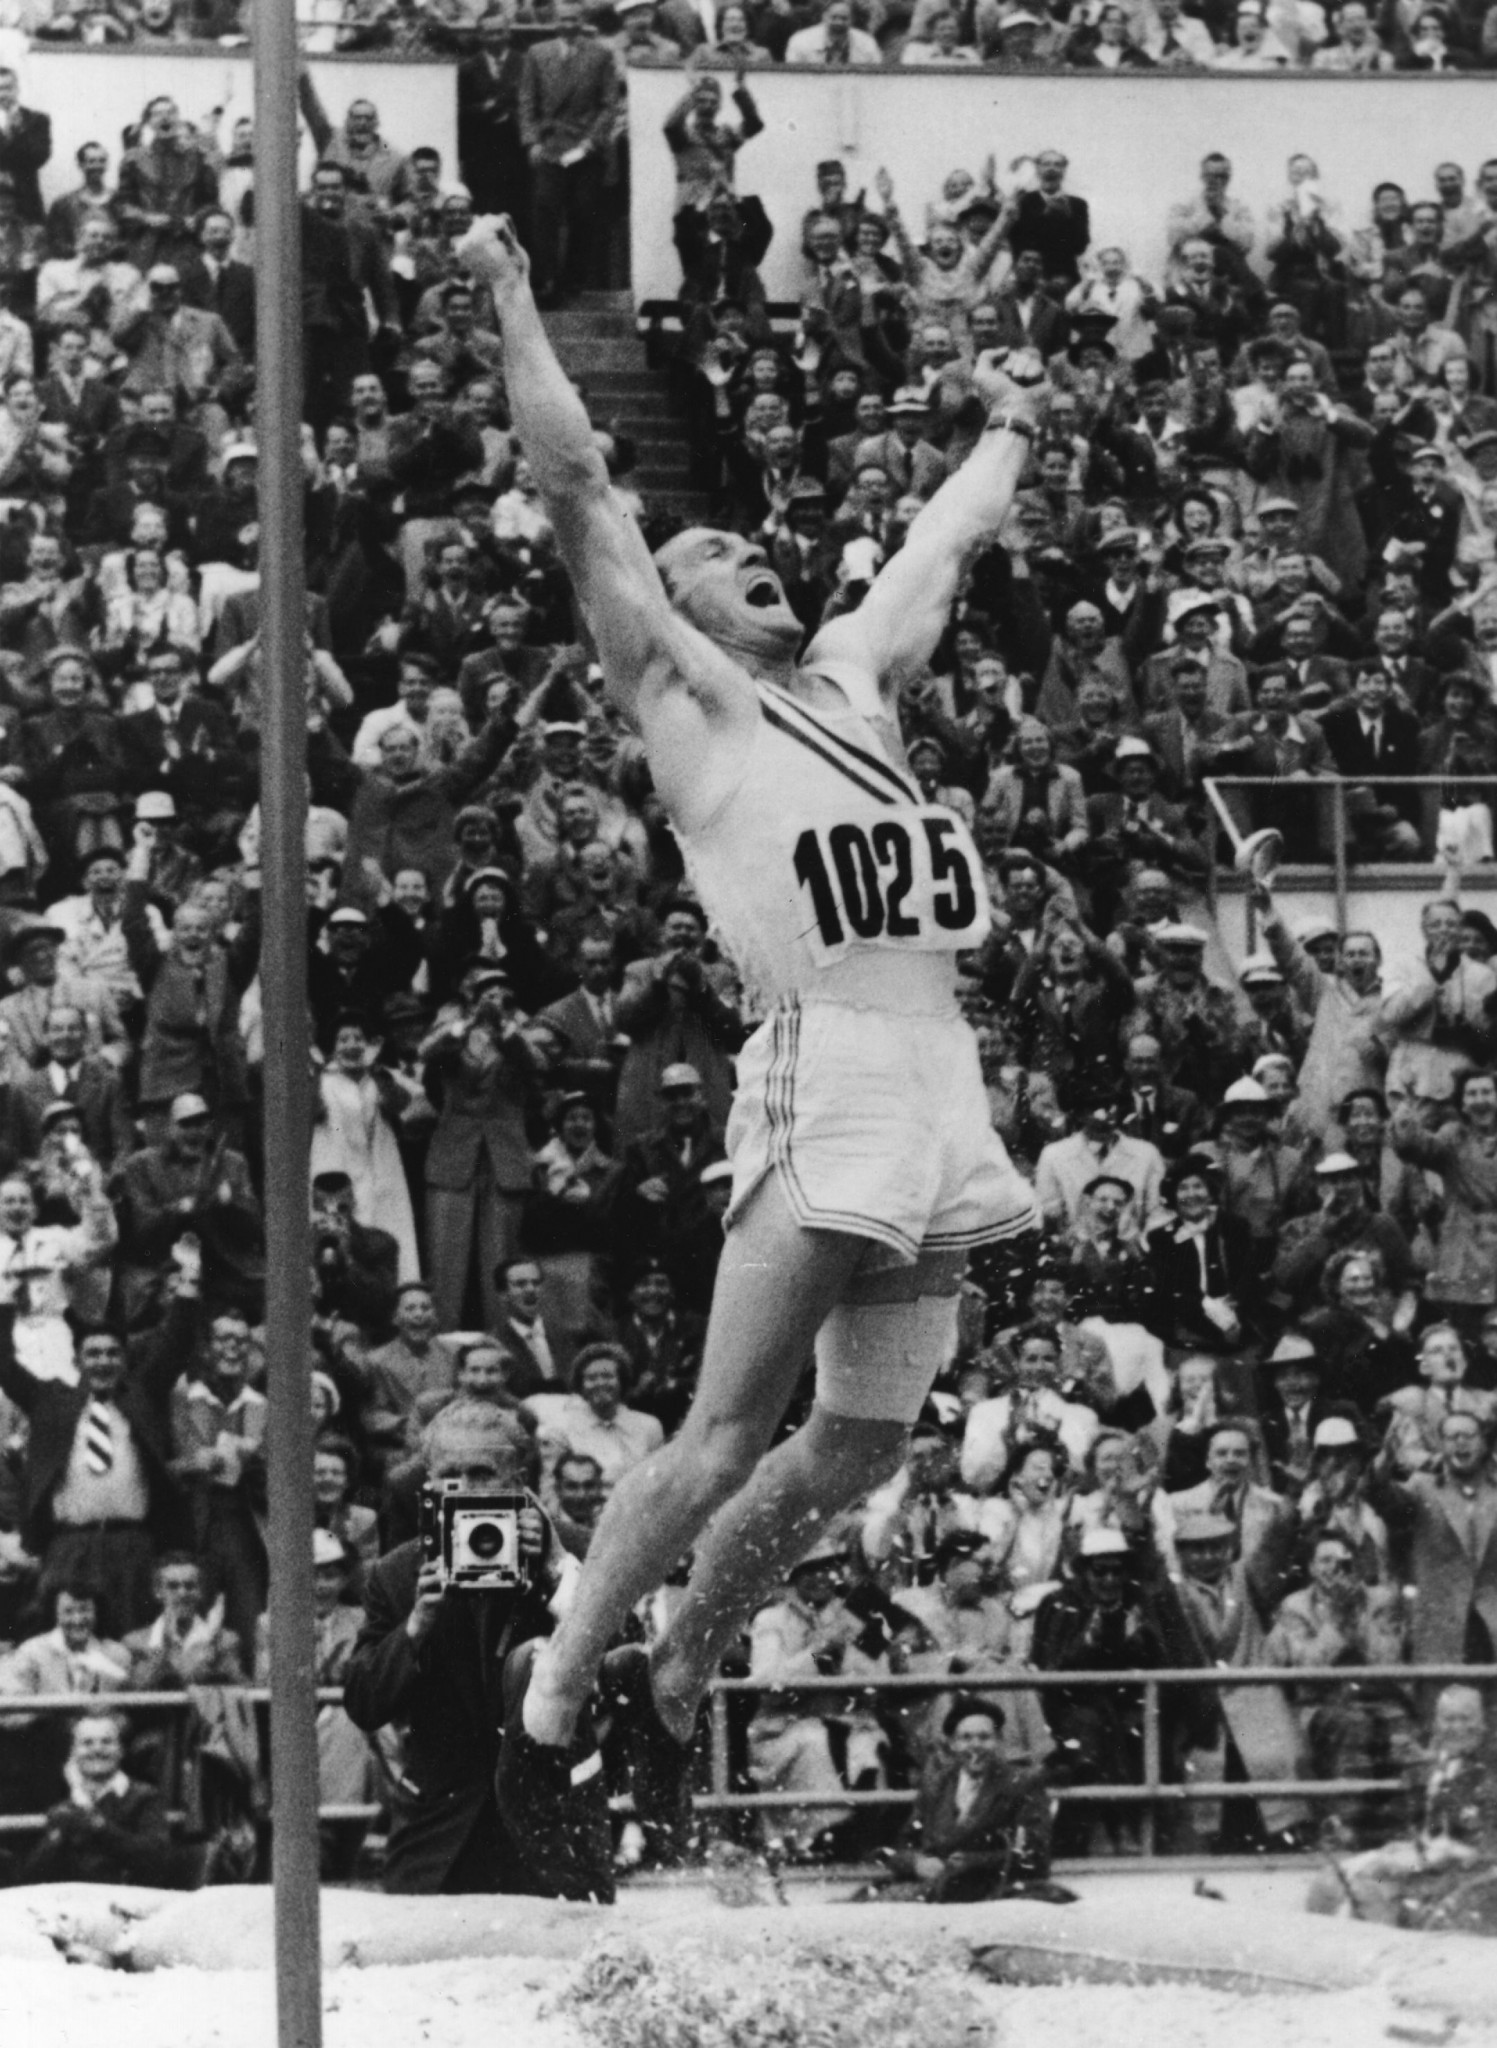 Bob Richards, first pole vaulter to win two Olympic gold medals, dies at age of 97